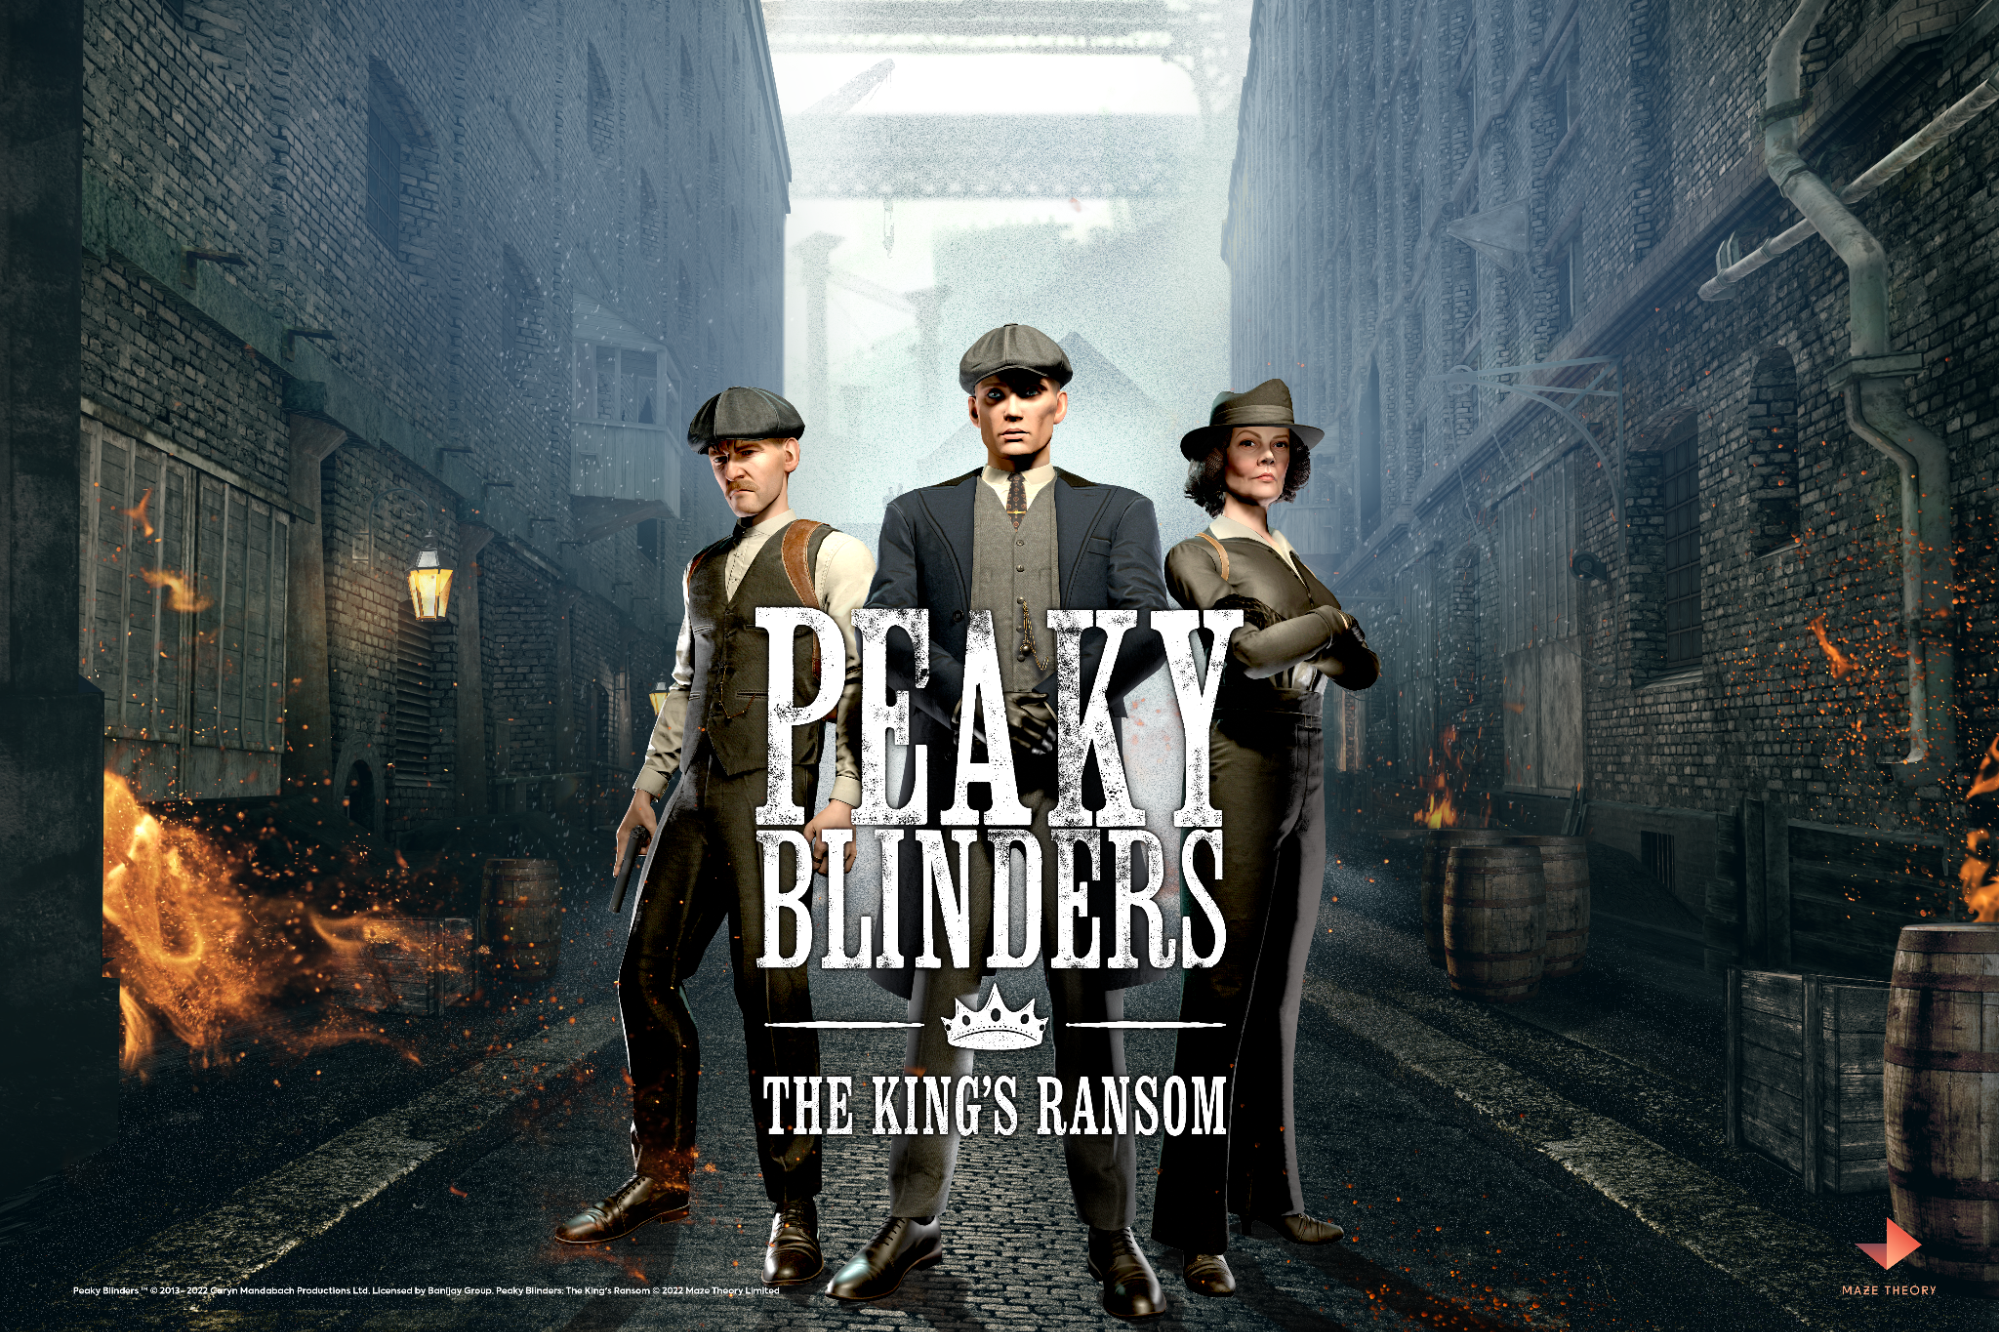  ‘Peaky Blinders: The King’s Ransom’ Demo Bound for PICO VR Later Today